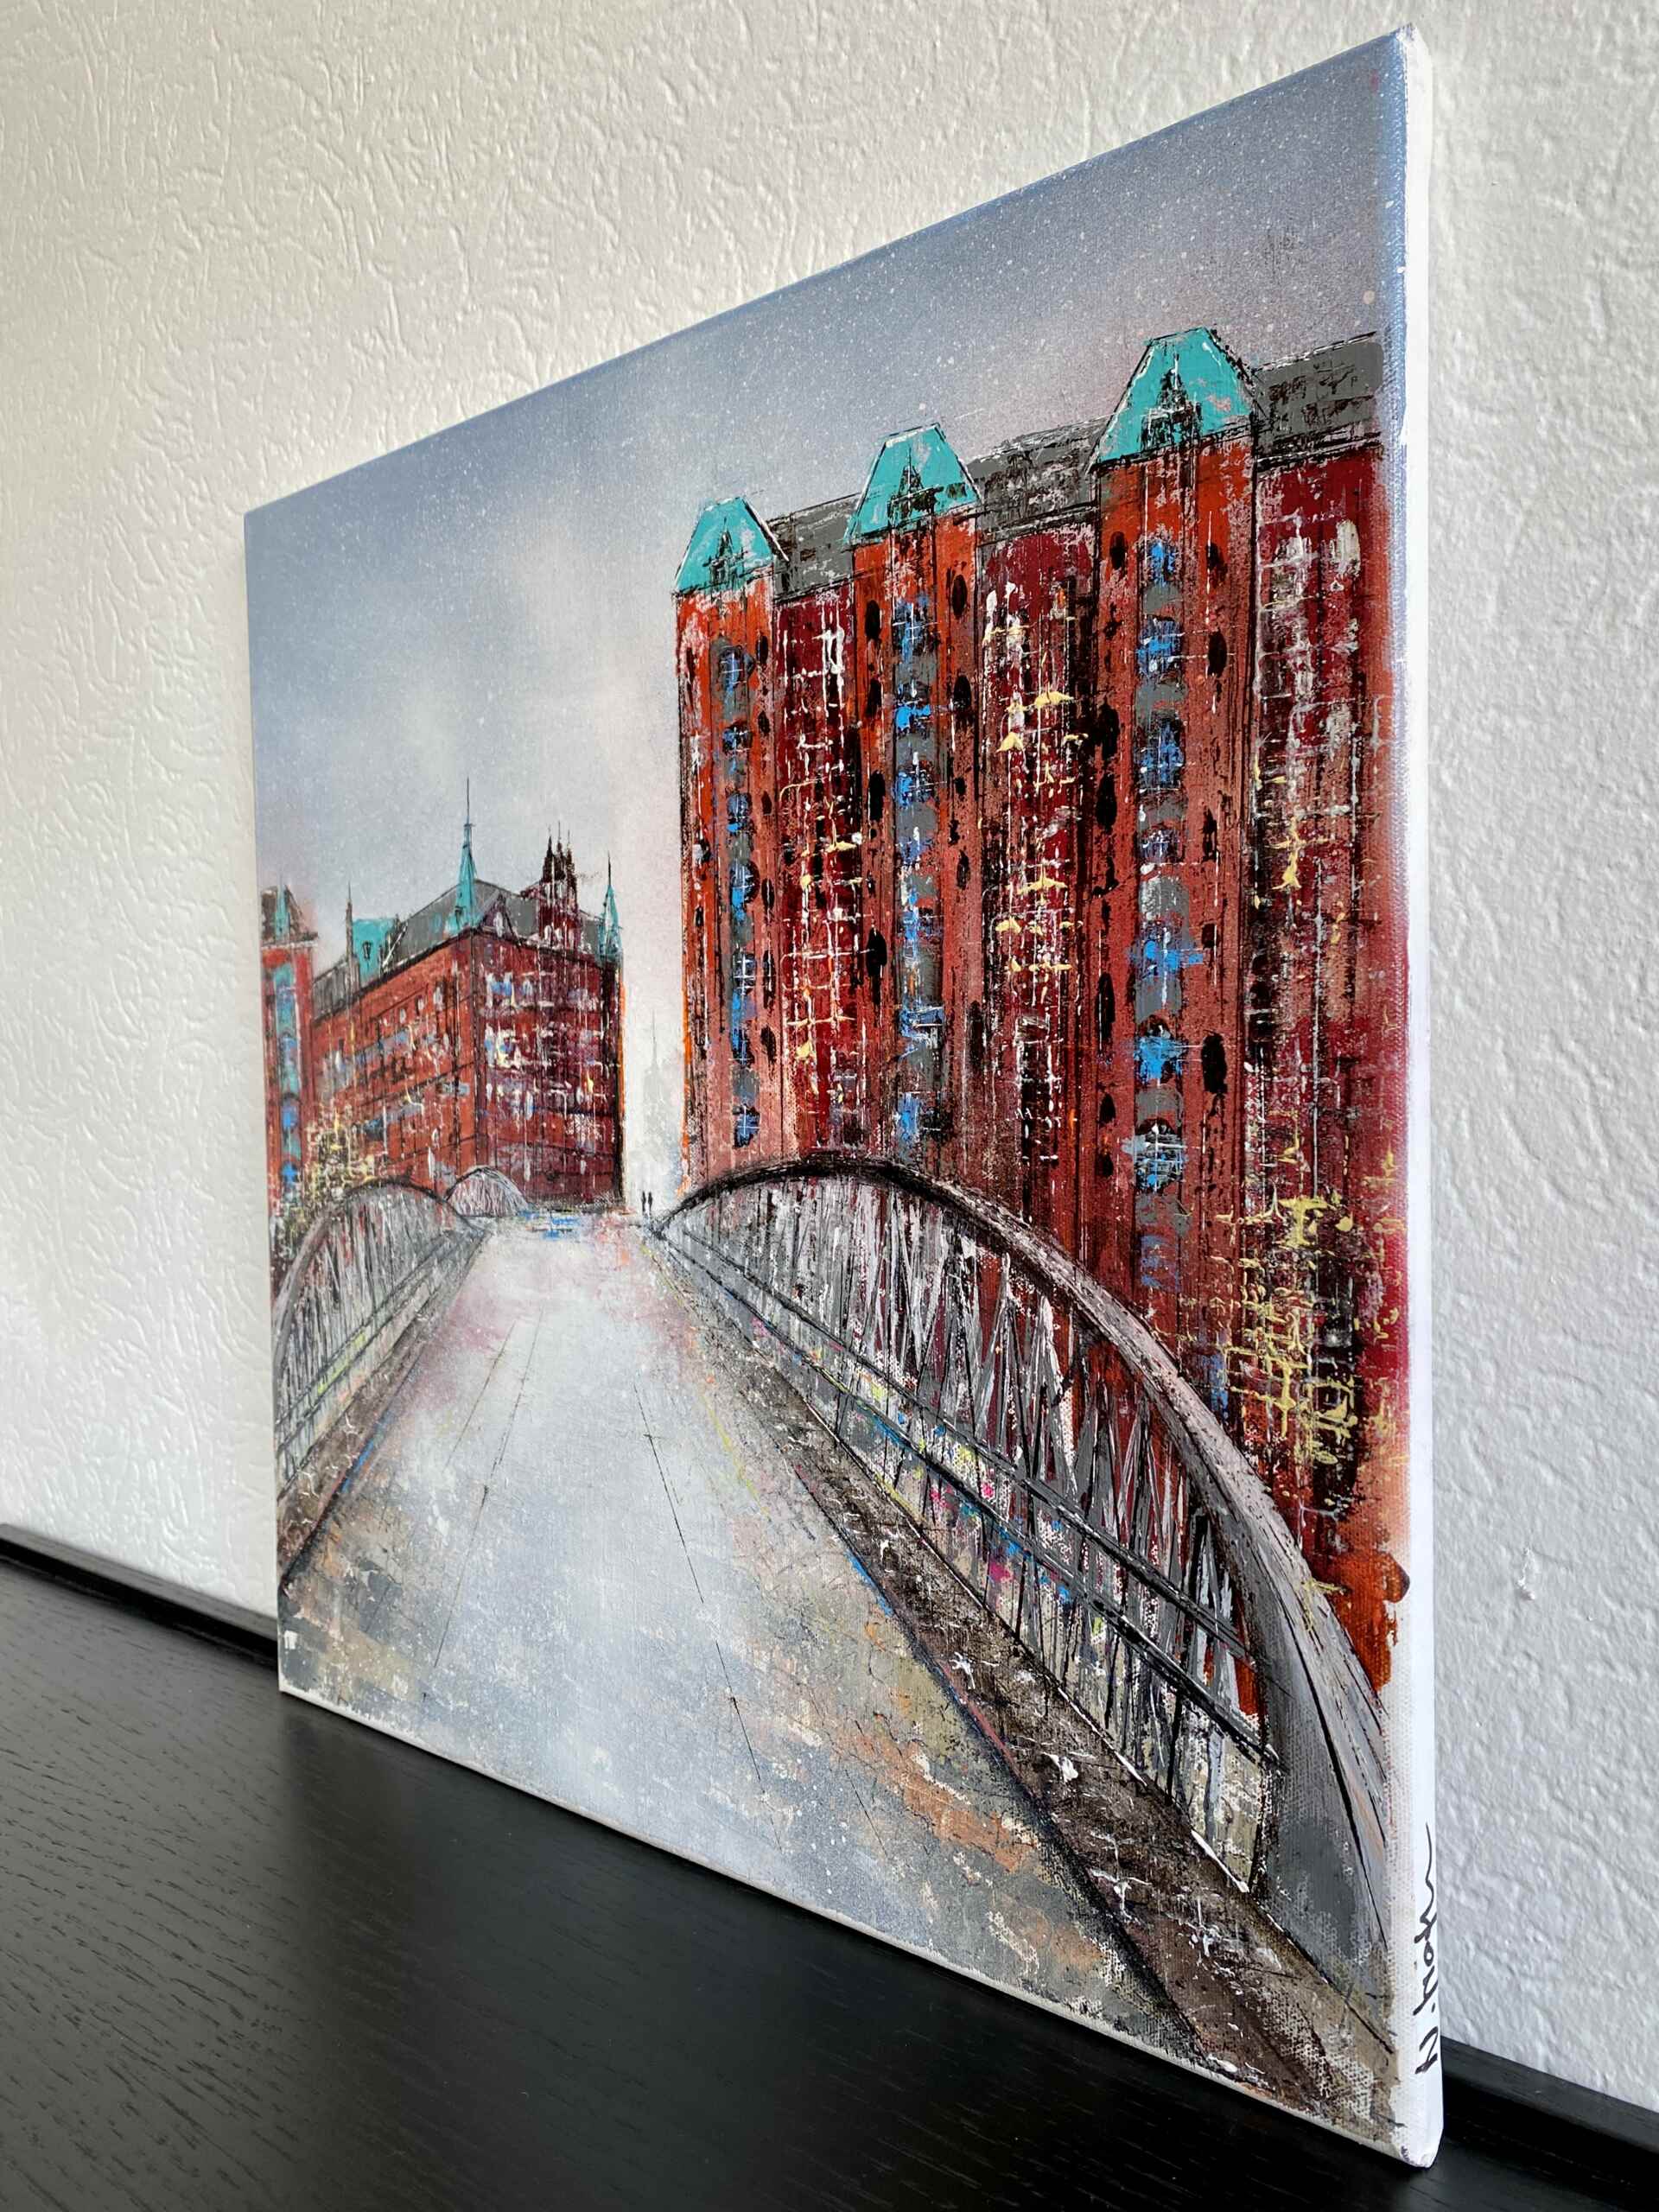 Side view of of artwork "Speicherstadt" by Nina Groth